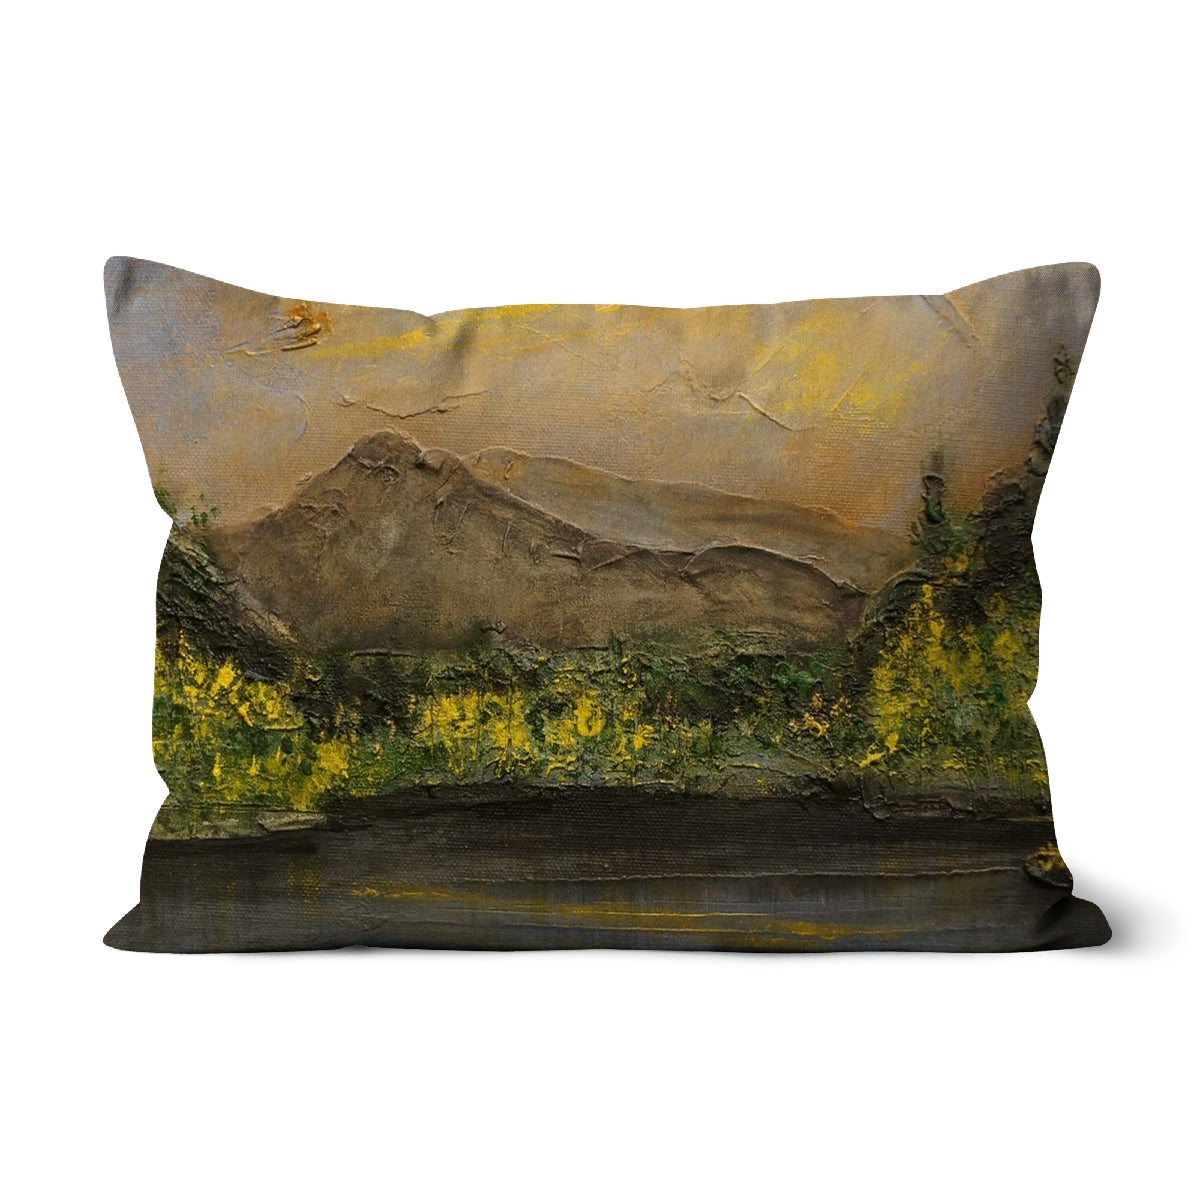 Glencoe Lochan Dusk Art Gifts Cushion-Cushions-Scottish Lochs & Mountains Art Gallery-Faux Suede-19"x13"-Paintings, Prints, Homeware, Art Gifts From Scotland By Scottish Artist Kevin Hunter